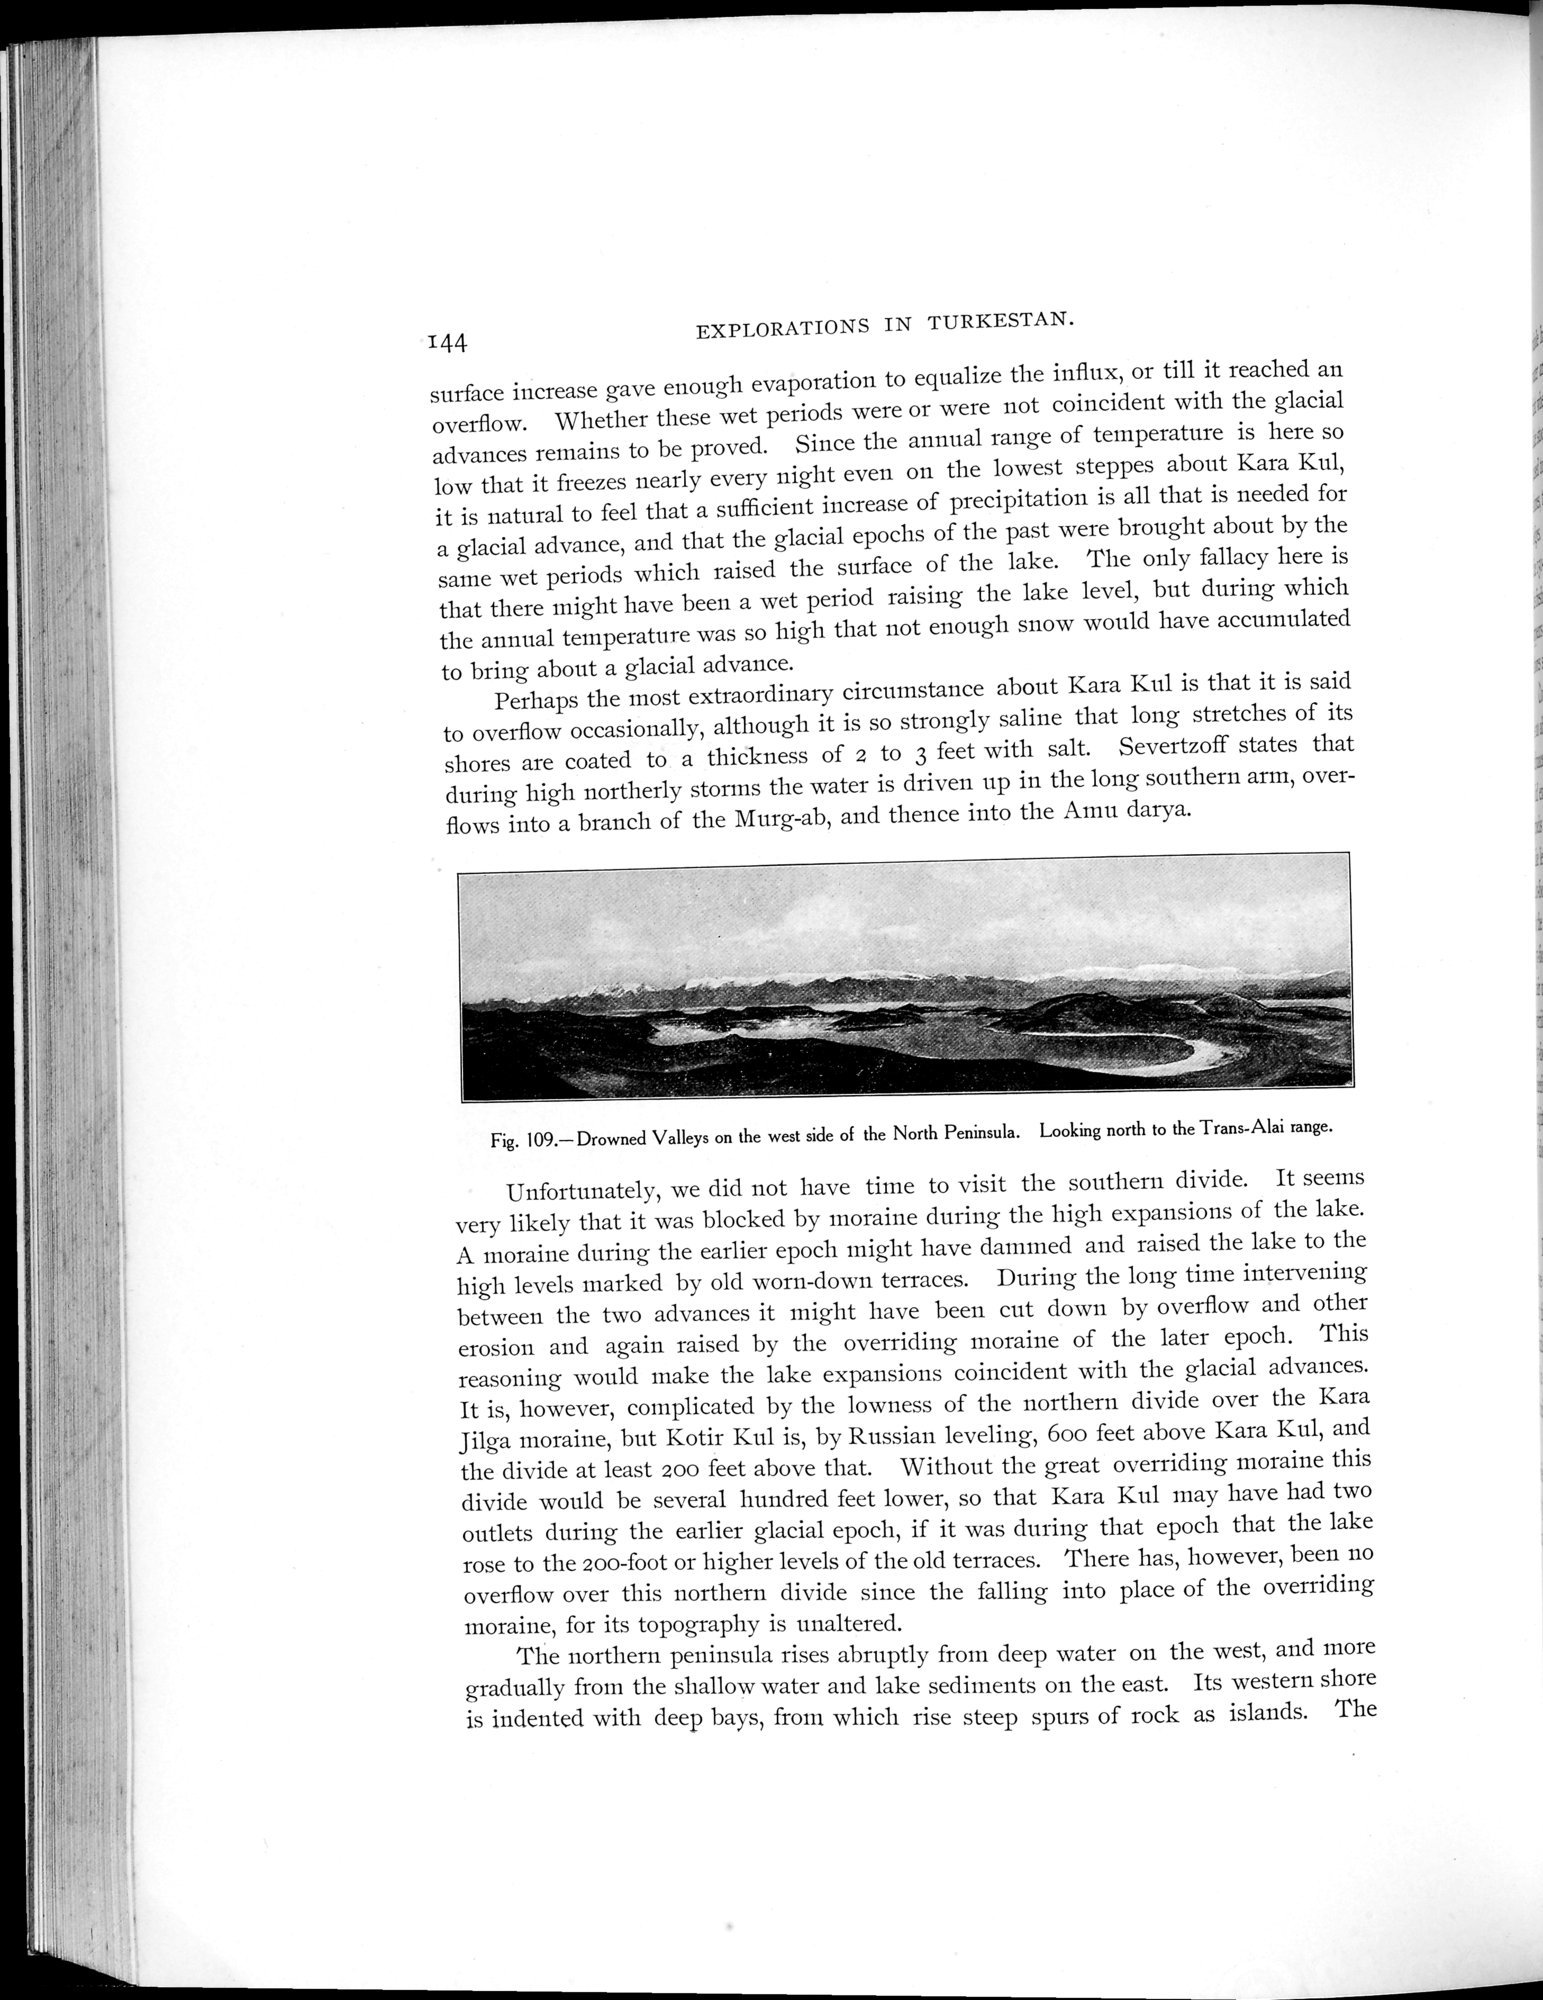 Explorations in Turkestan 1903 : vol.1 / Page 170 (Grayscale High Resolution Image)